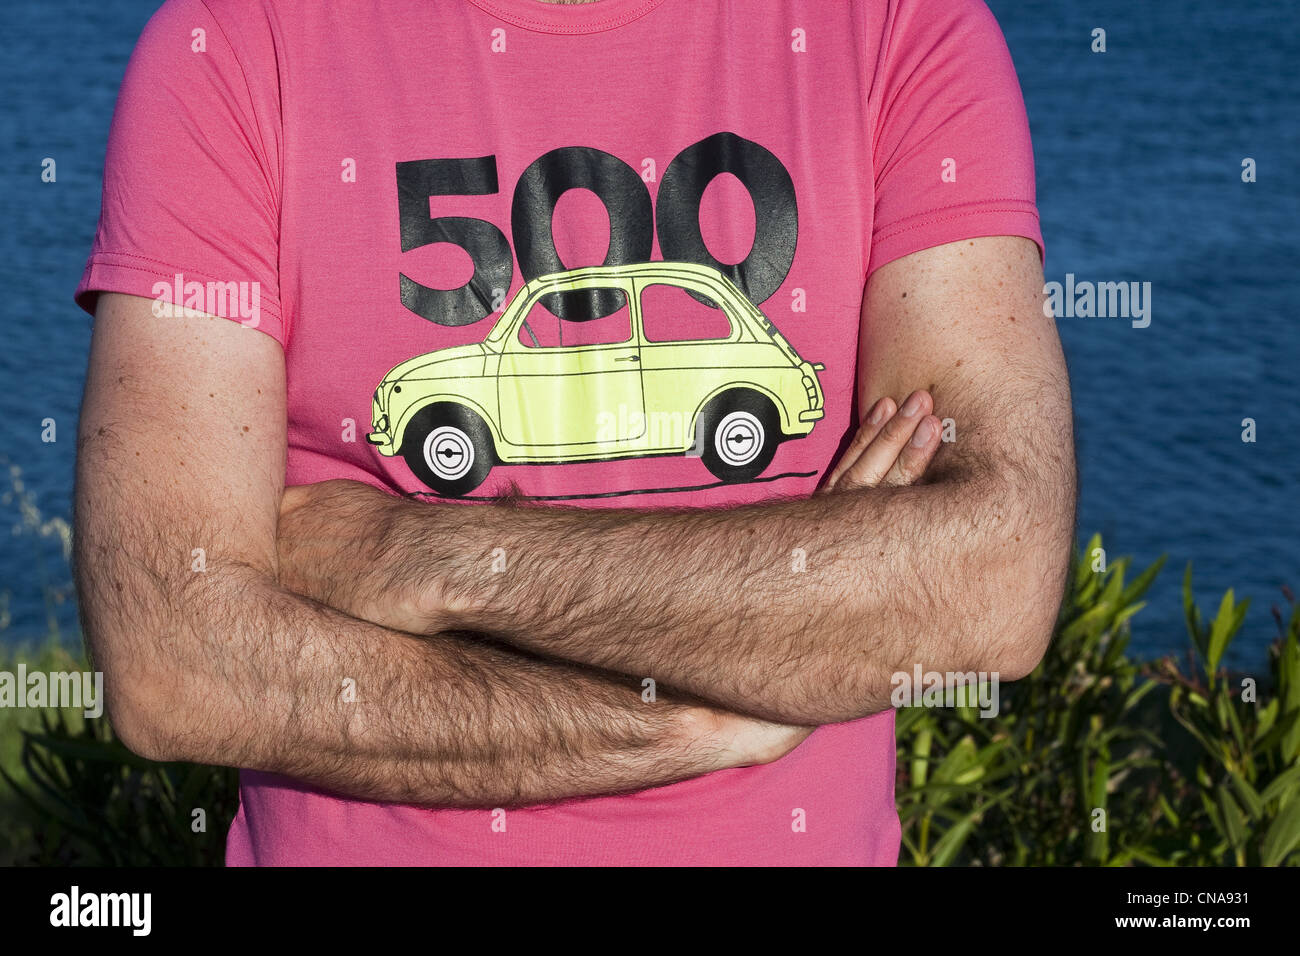 Italy, Puglia, Bari province, Monopoli, tee-shirt with Fiat 500 design, the car was first sold in Italy between 1957 and 1975 Stock Photo